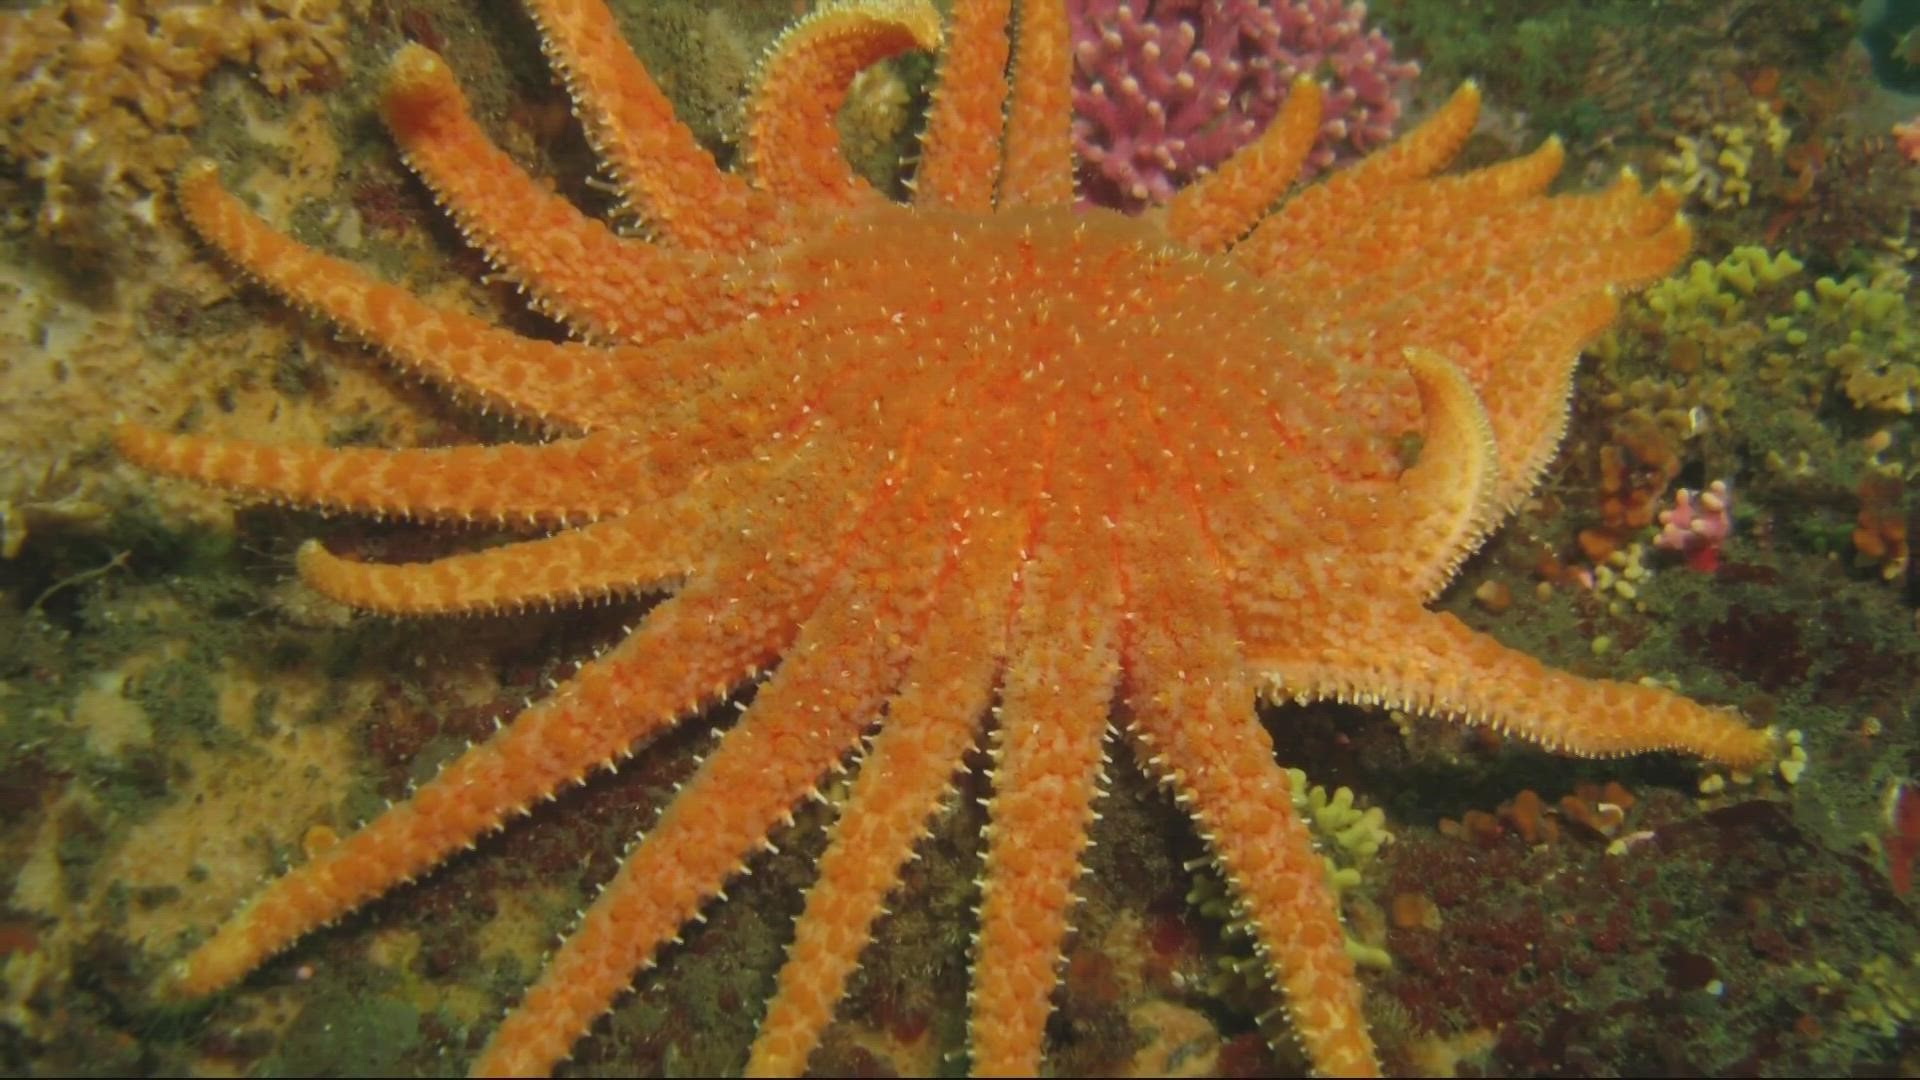 Sea stars began vanishing in 2013 due to a mysterious wasting disease. Without them, sea urchin populations have exploded.